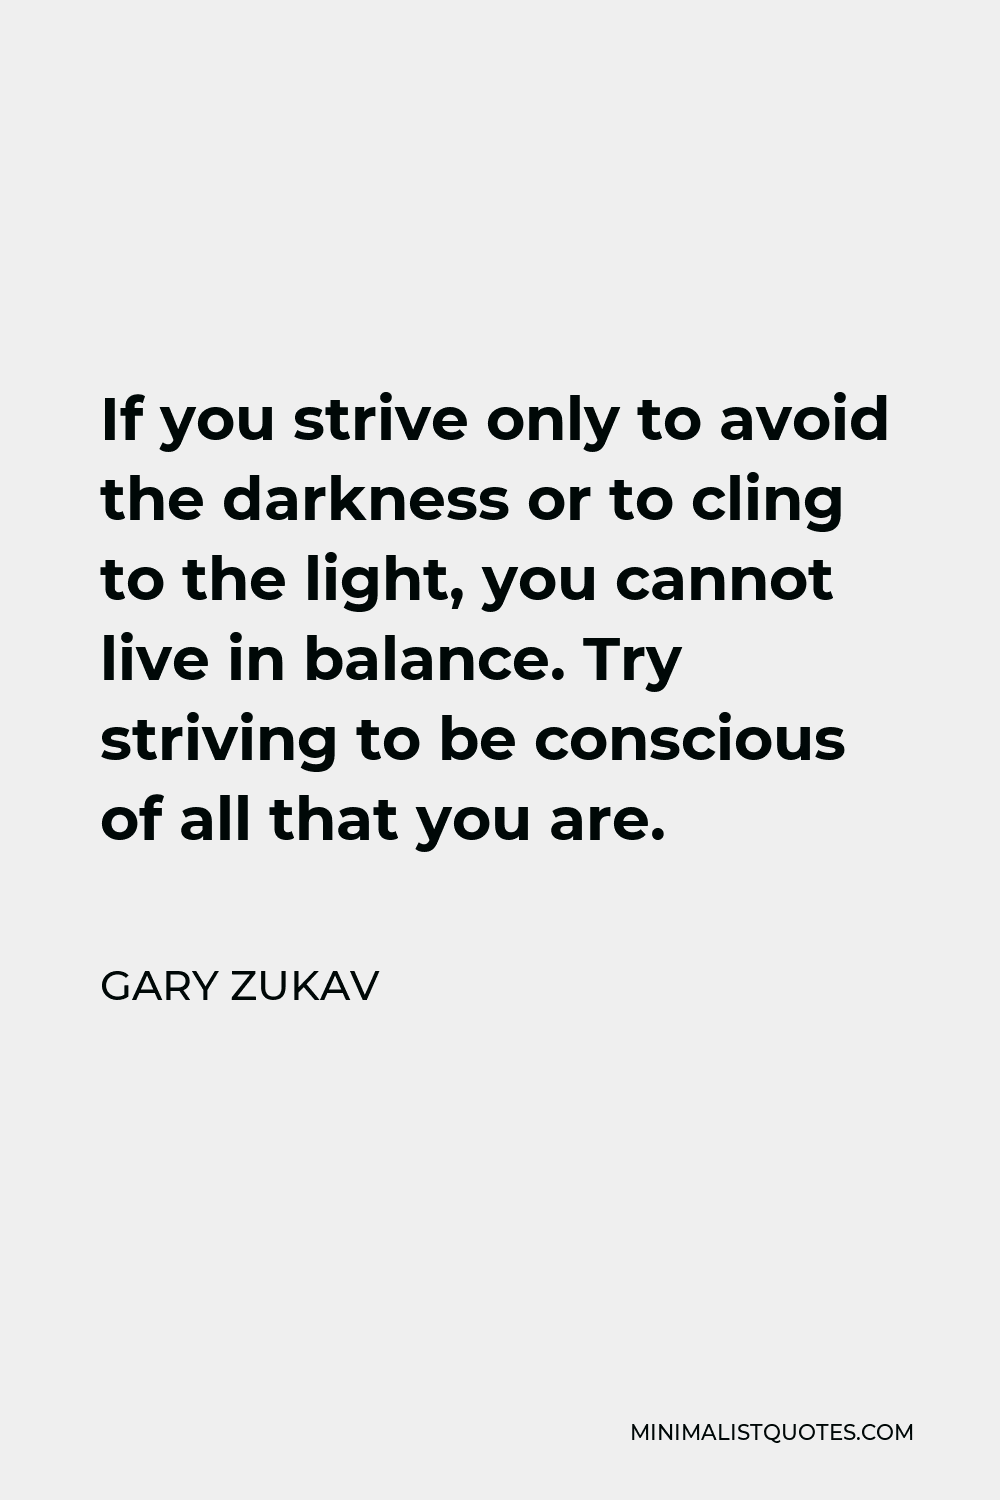 Gary Zukav Quote - If you strive only to avoid the darkness or to cling to the light, you cannot live in balance. Try striving to be conscious of all that you are.